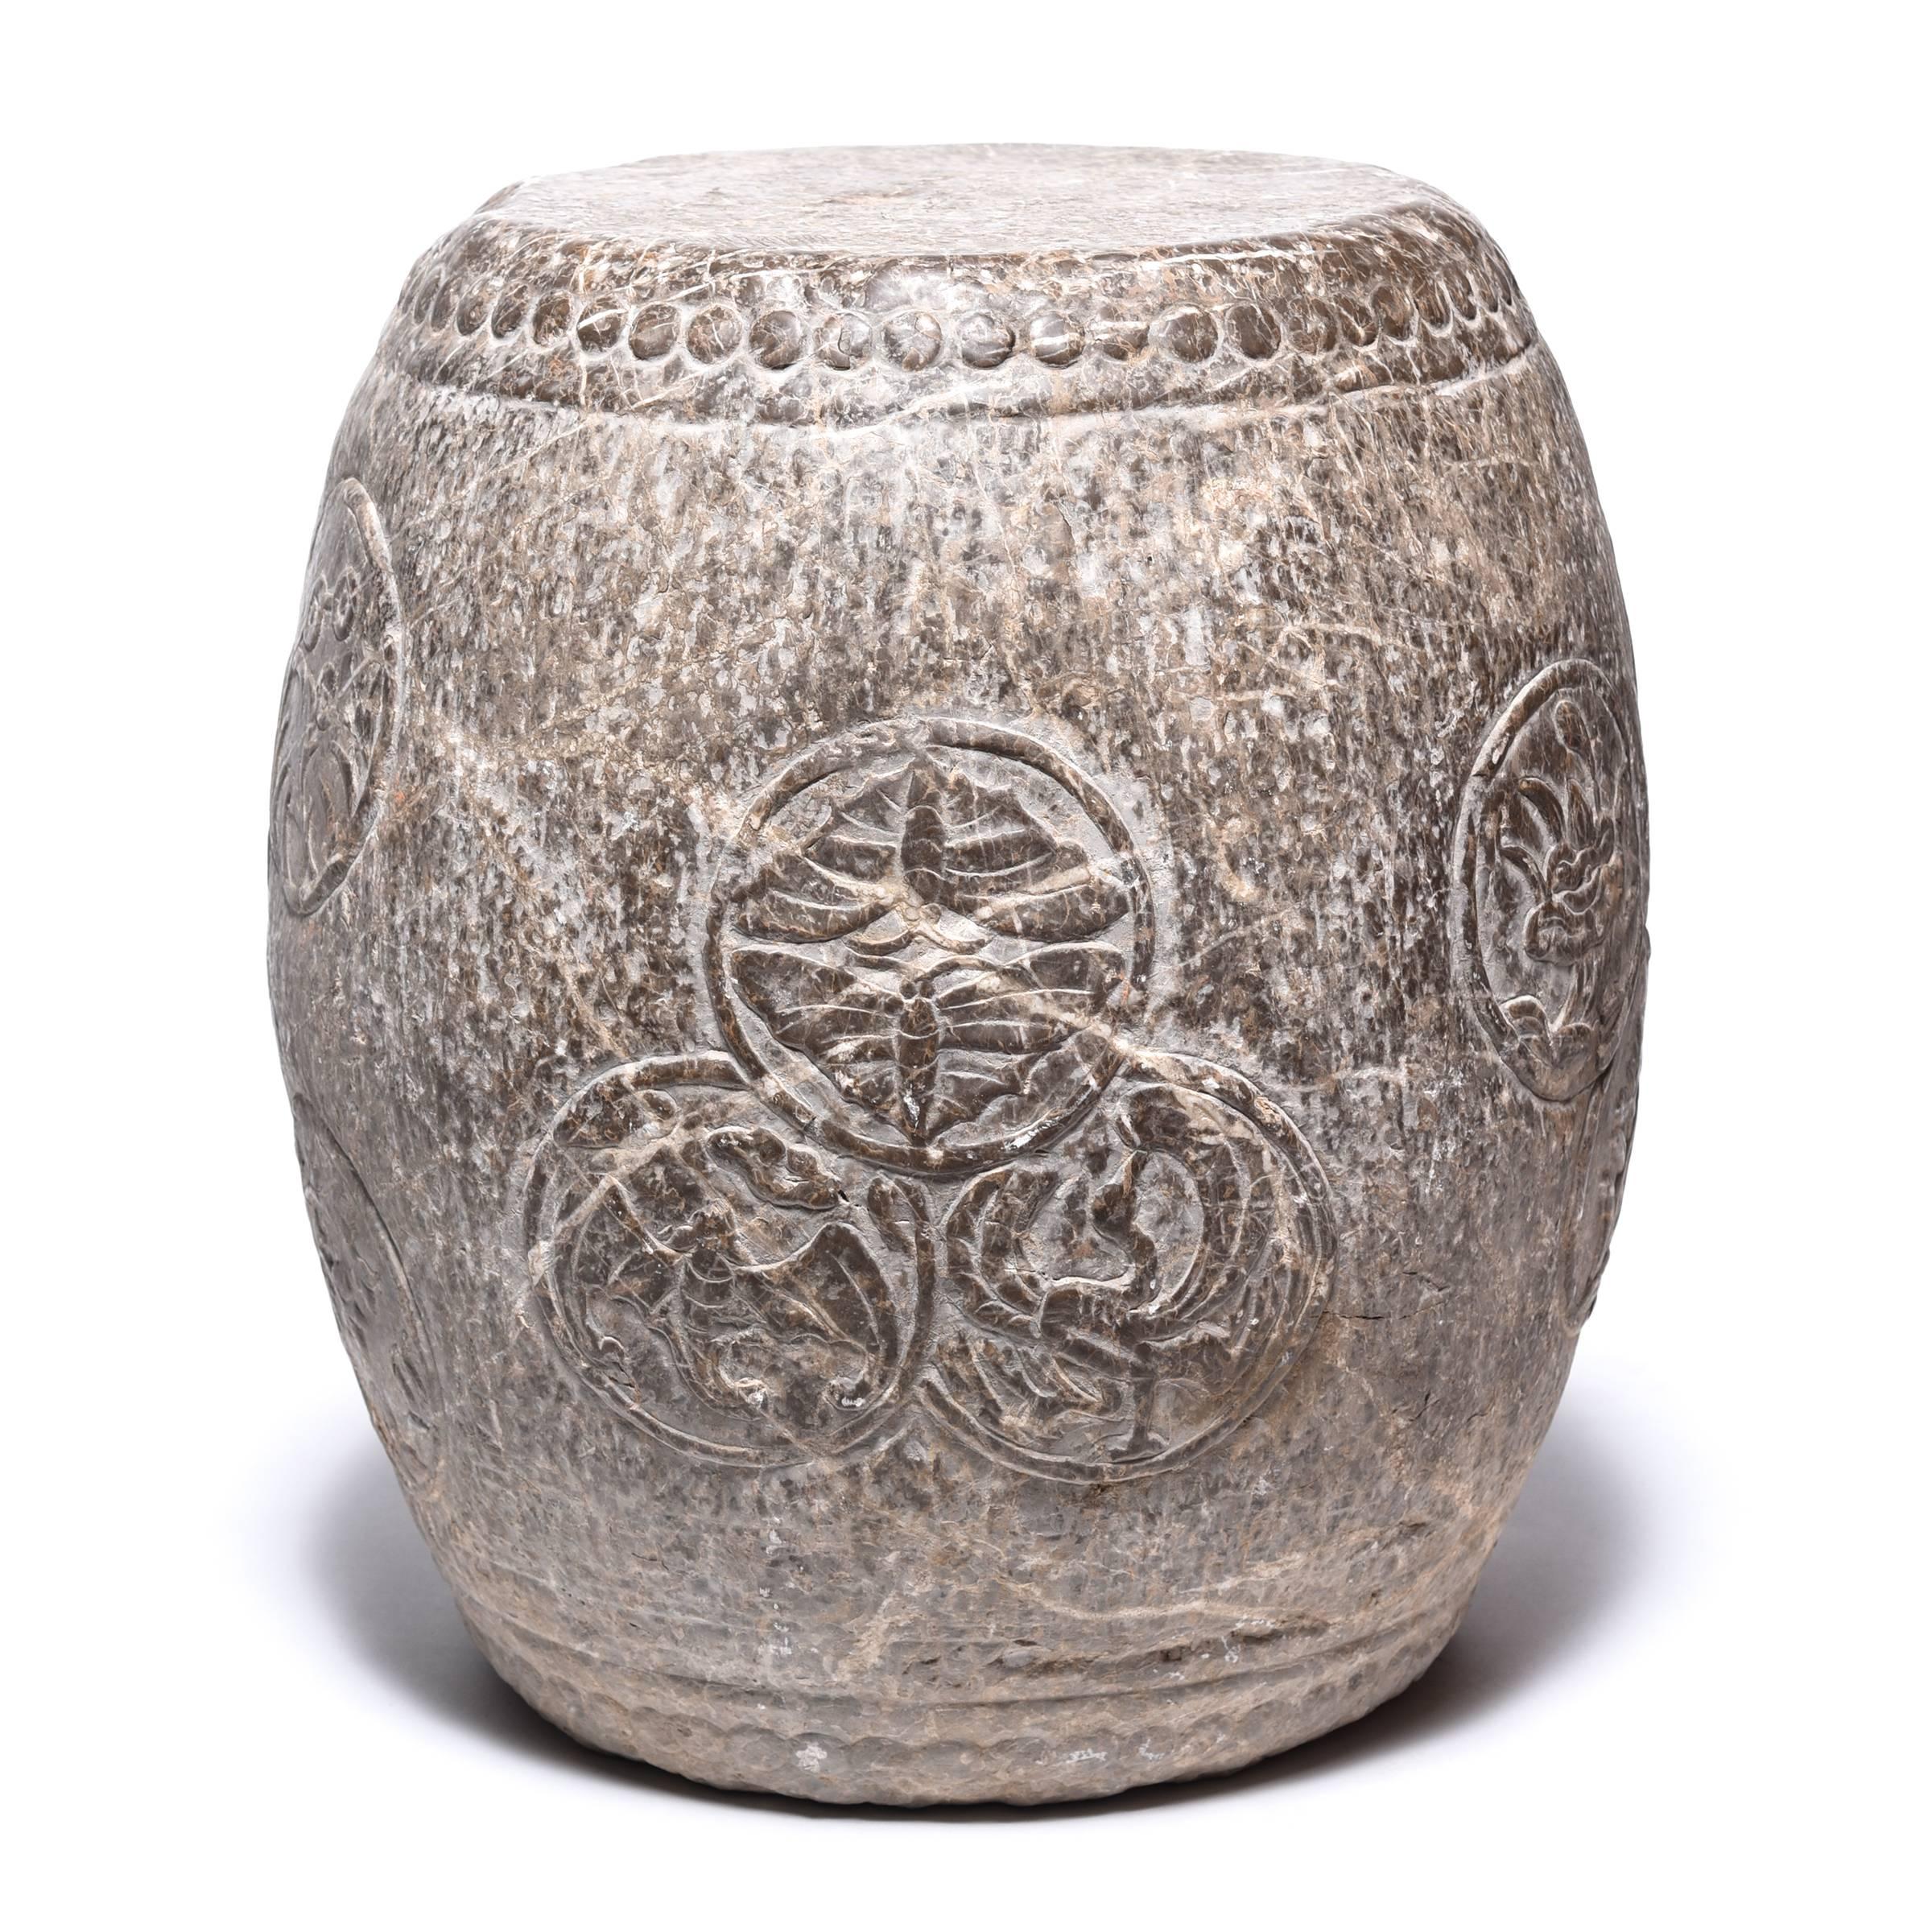 Circular charms adorn the graceful swell of this elegant stone drum stool. An encircled bat symbolizes happiness and joy, while a phoenix represents the spiritual union of yin and yang. Paired butterflies recall an ancient folktale that tells of